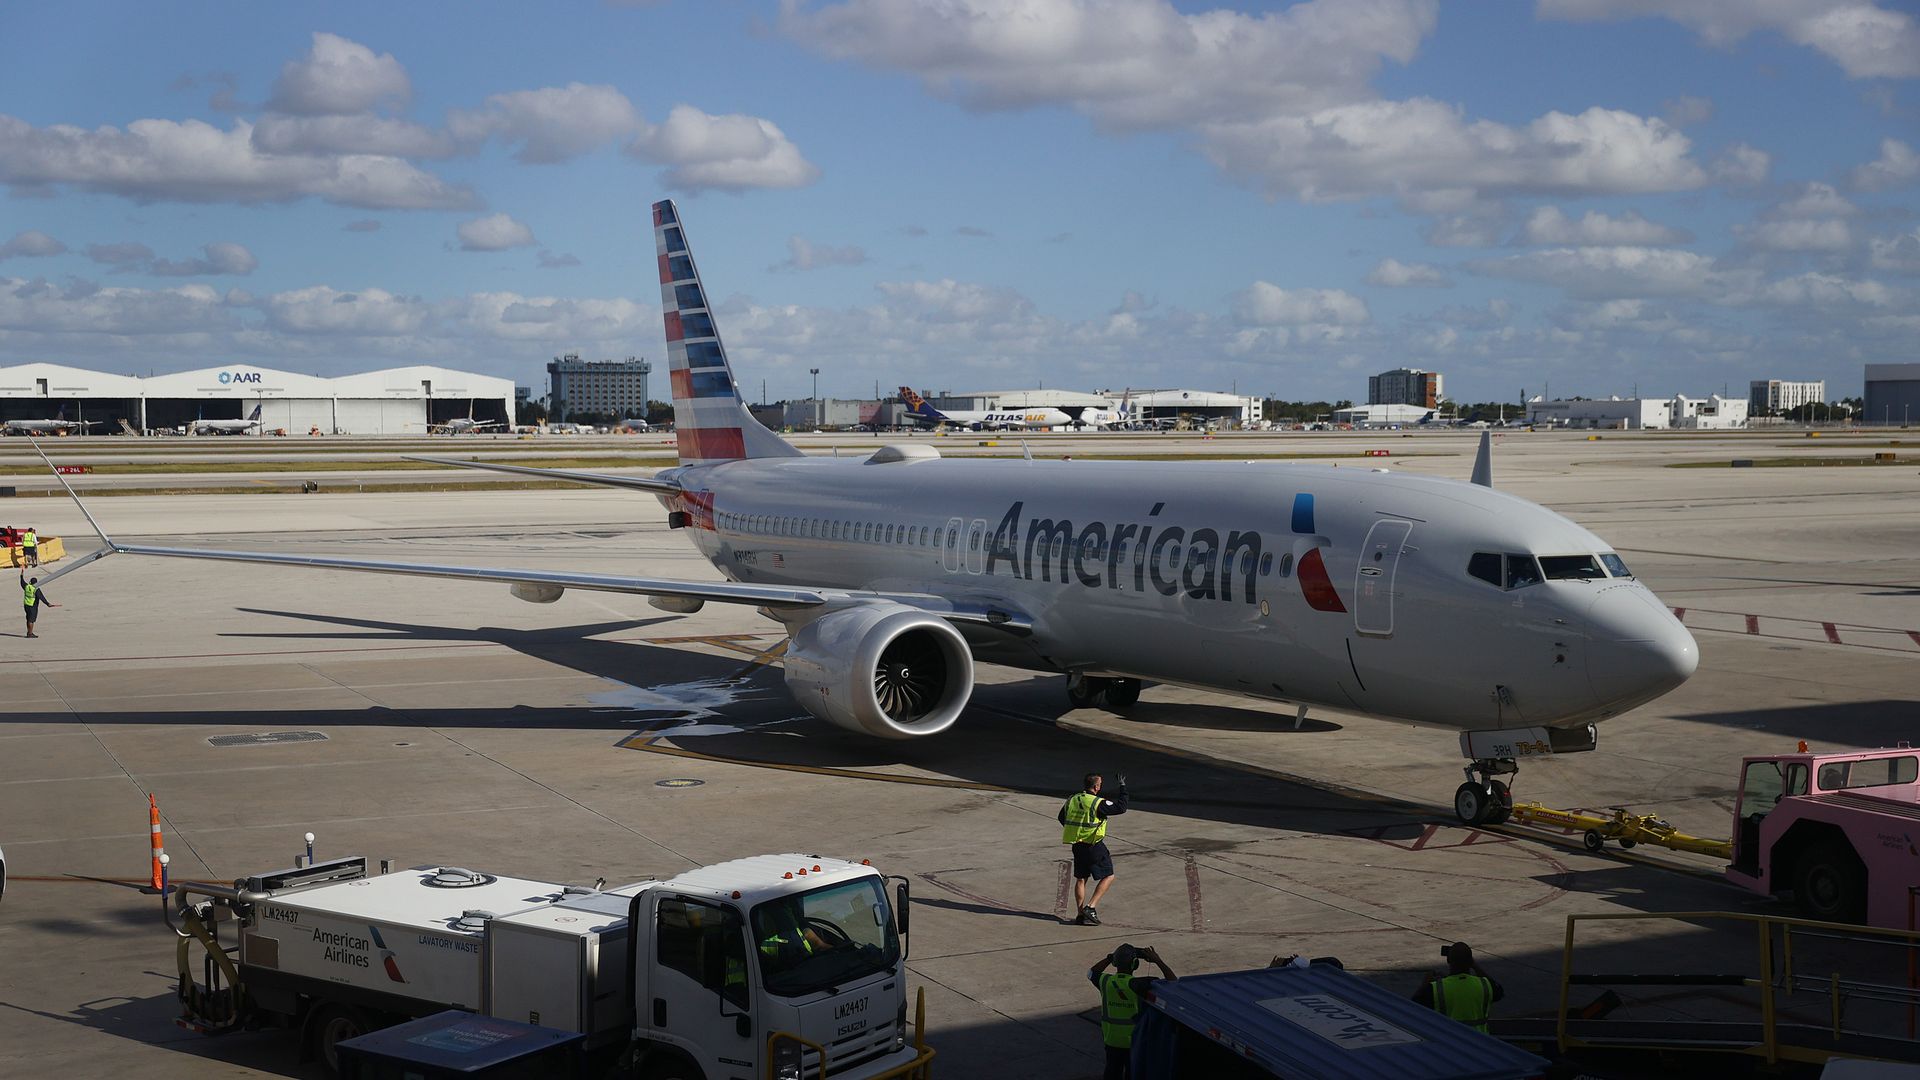 American Airlines flight 718, a Boeing 737 Max, is pushed back from its gate at Miami International Airport on its way to New York on December 29, 2020 in Miami, Florida. 